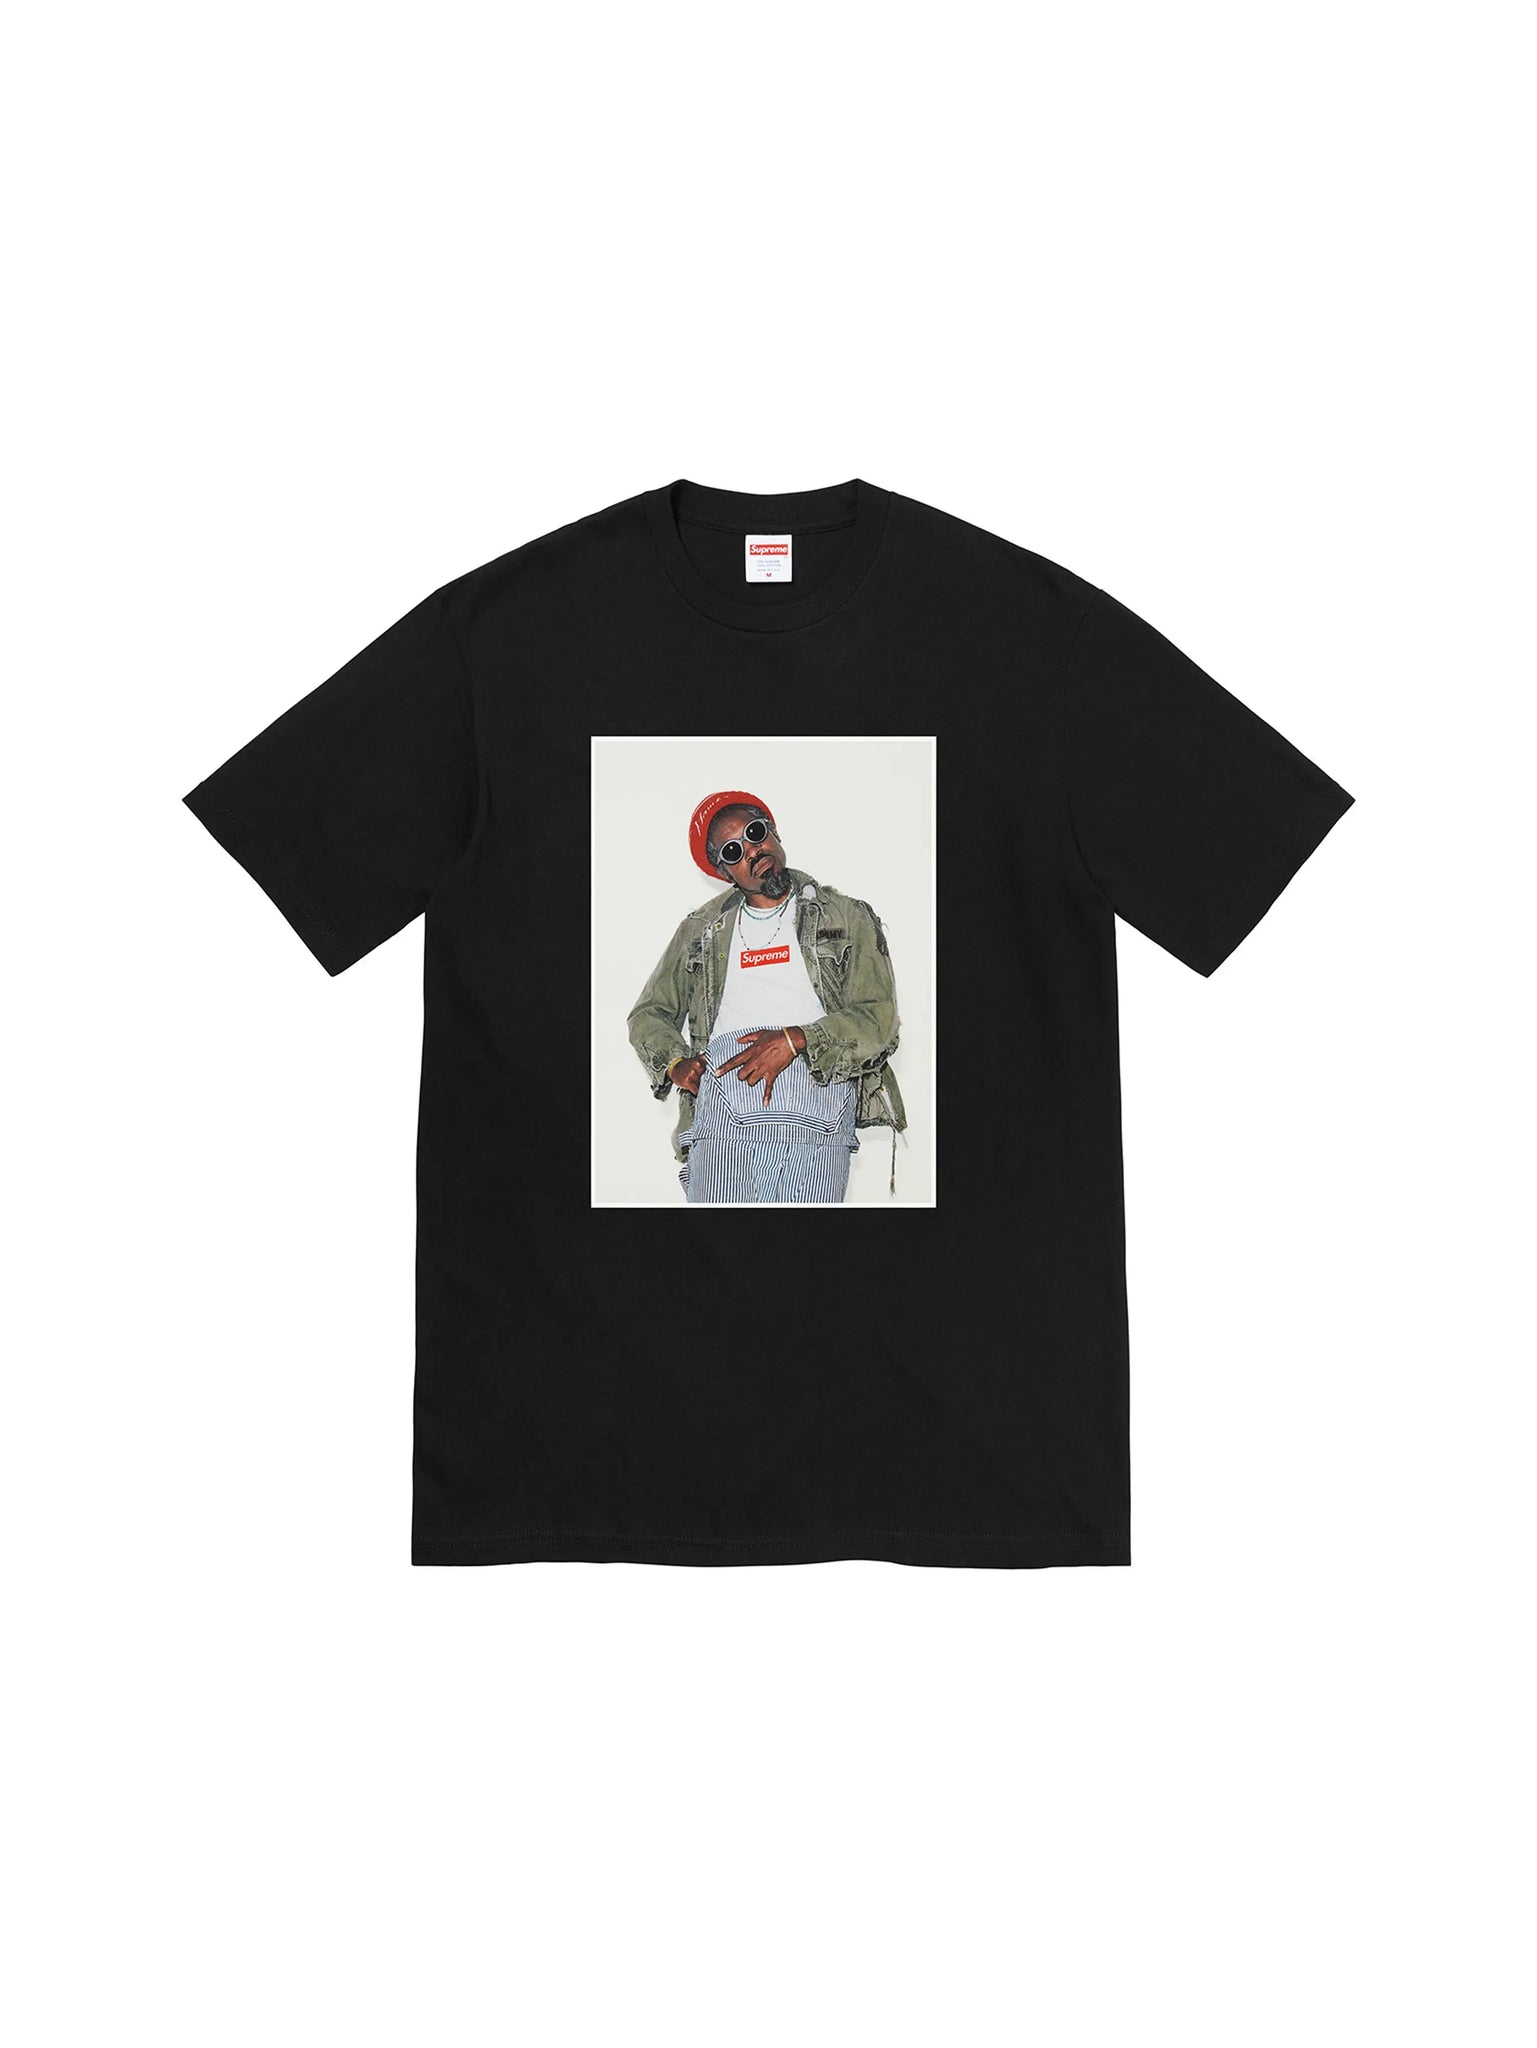 Supreme André 3000 Tee Black in Auckland, New Zealand - Shop name